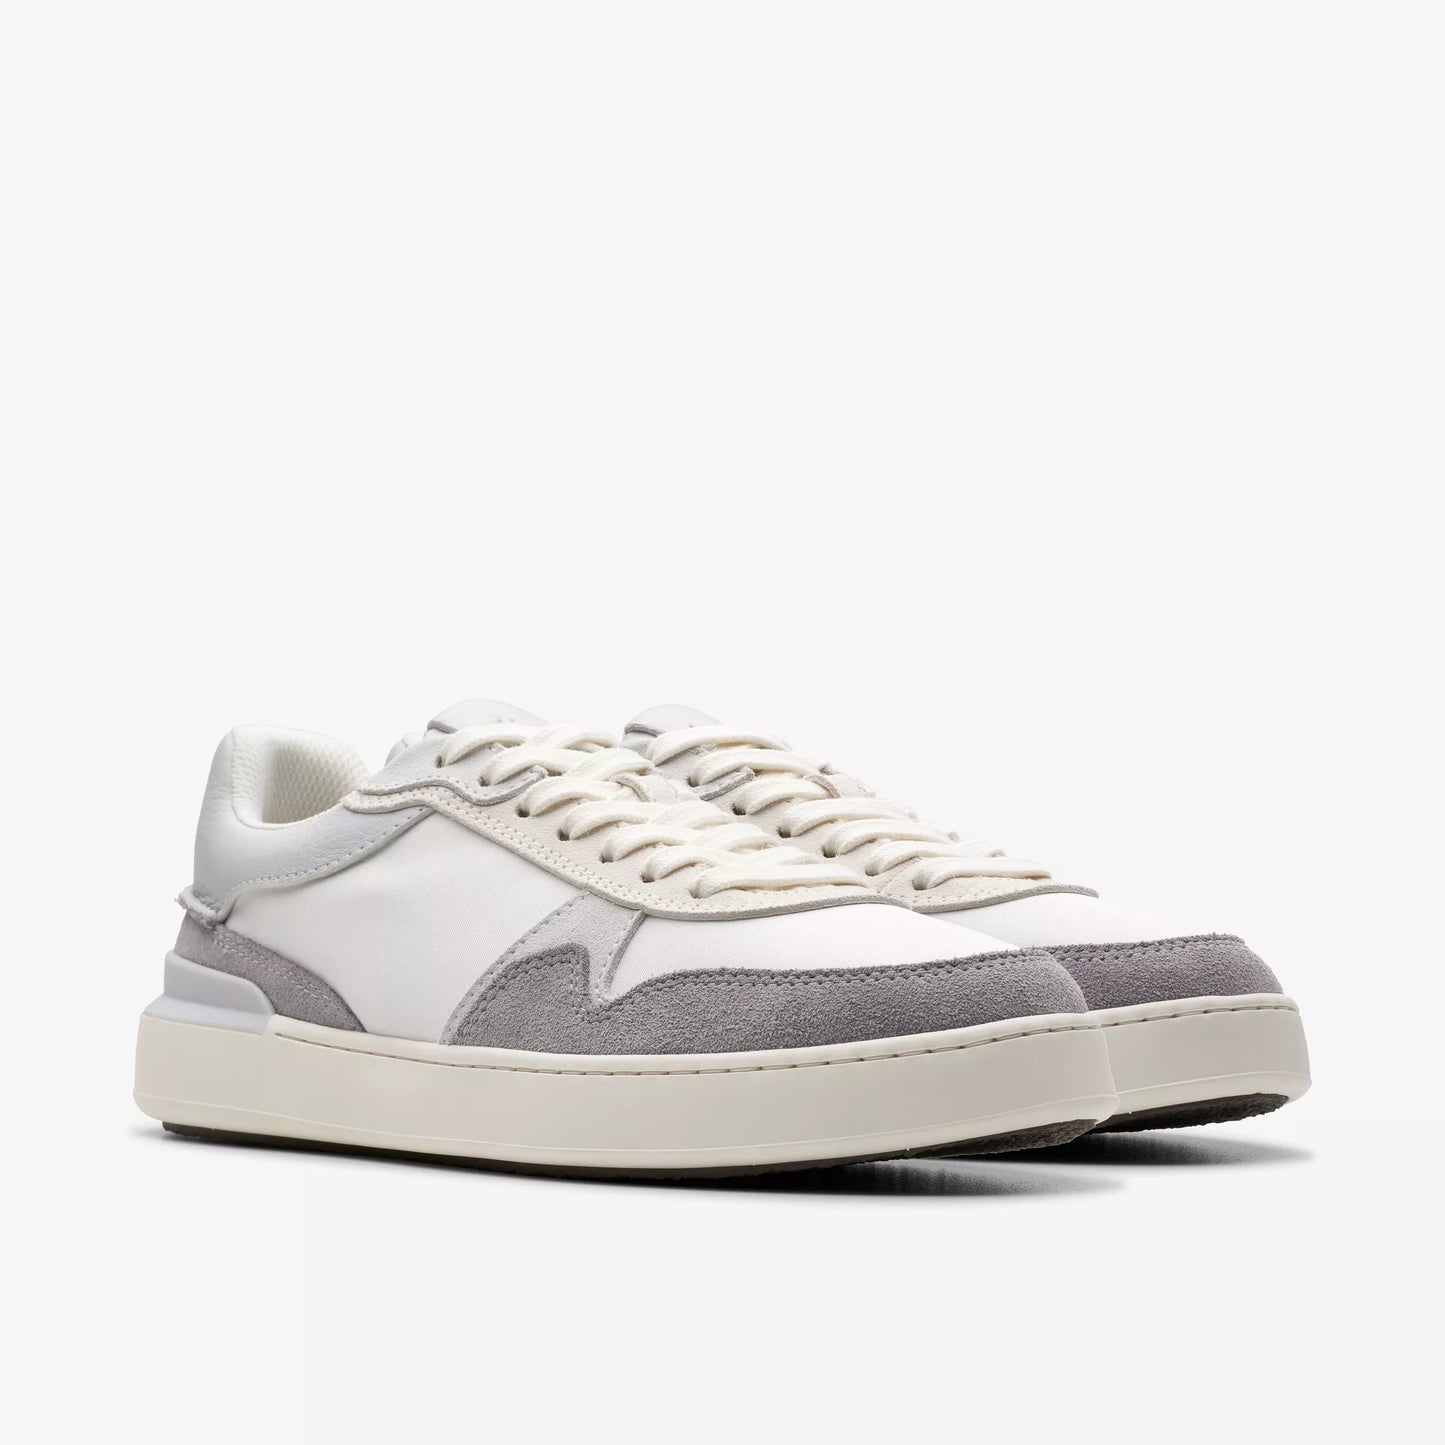 Clarks Court Lite Race Sneaker in the color Light Grey Combo